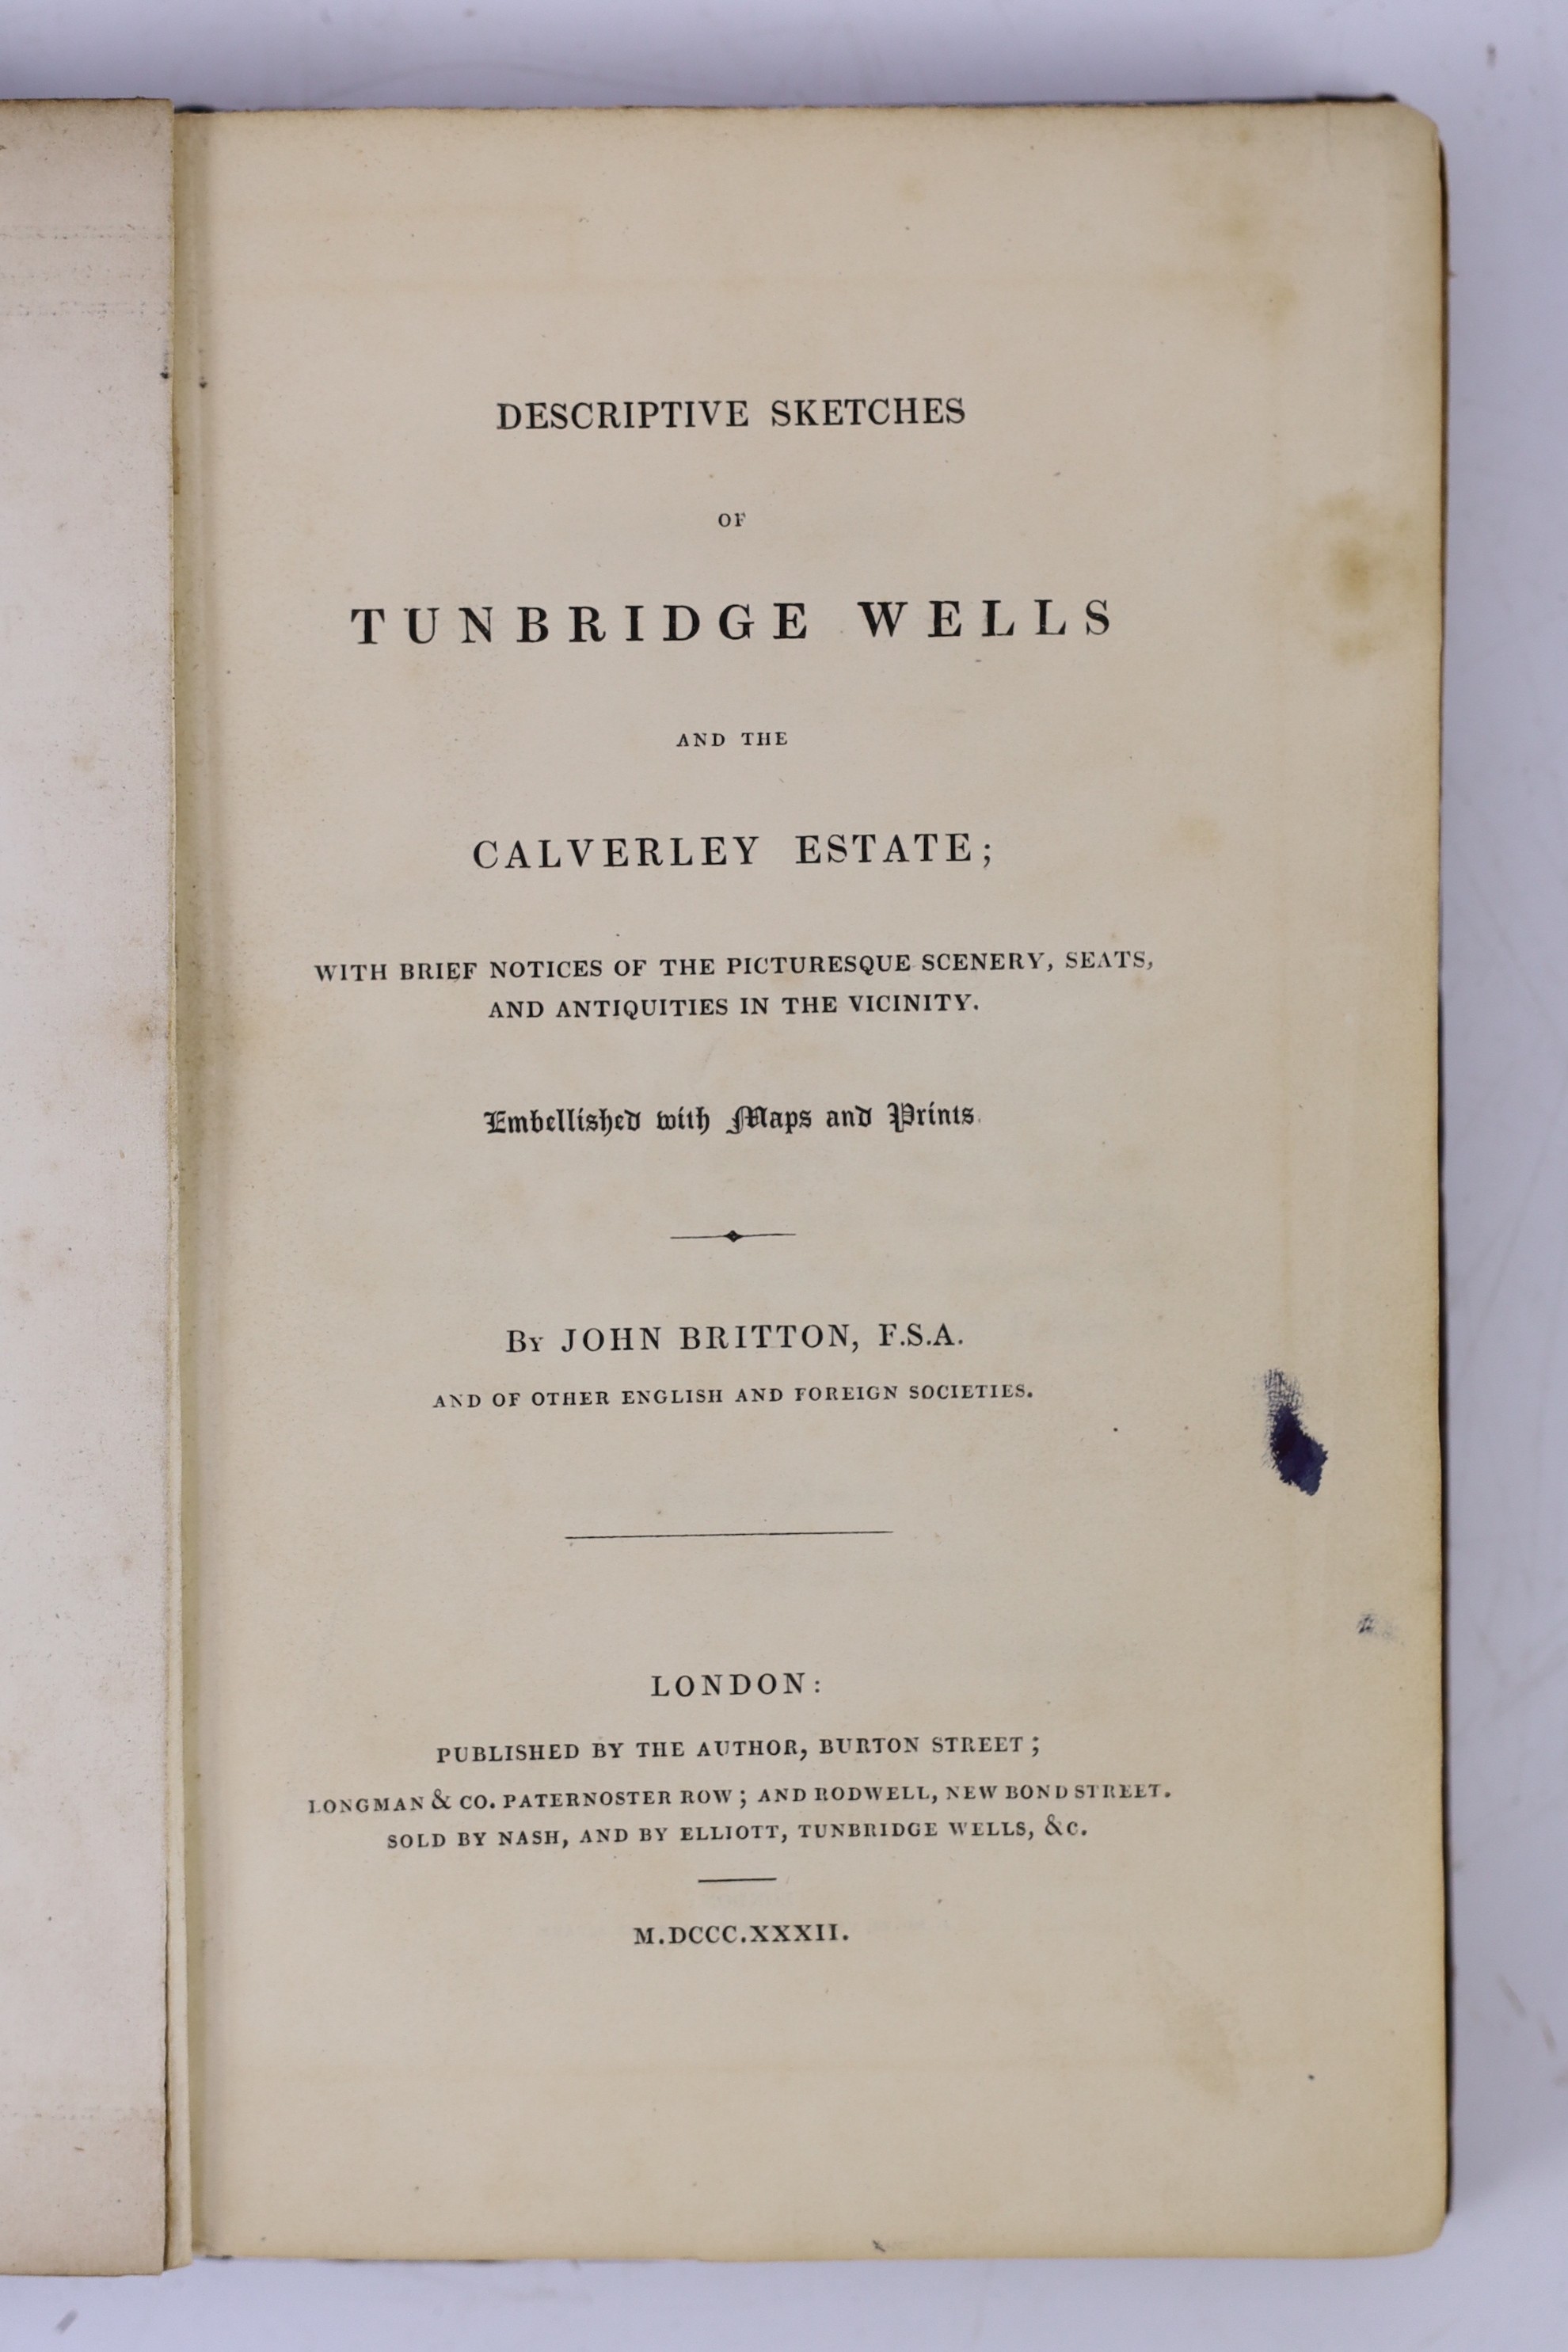 KENT, TUNBRIDGE WELLS: Britton, John - Descriptive Sketches of Tunbridge Wells and the Calverley Estate... 2 d-page lithographed plans, 10 lithographed plates and text engravings; original cloth and paper label (rebacked